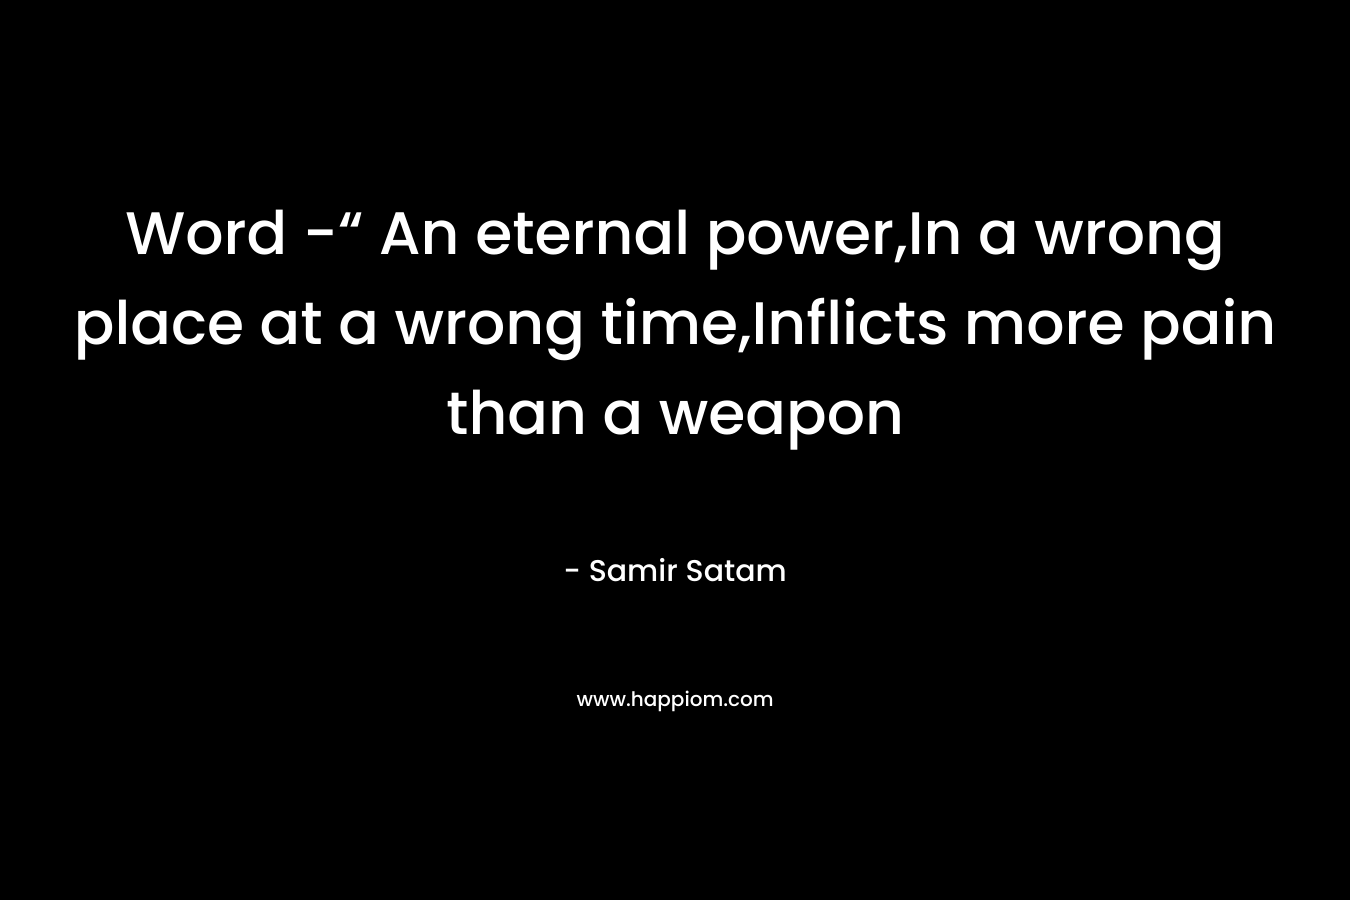 Word -“ An eternal power,In a wrong place at a wrong time,Inflicts more pain than a weapon